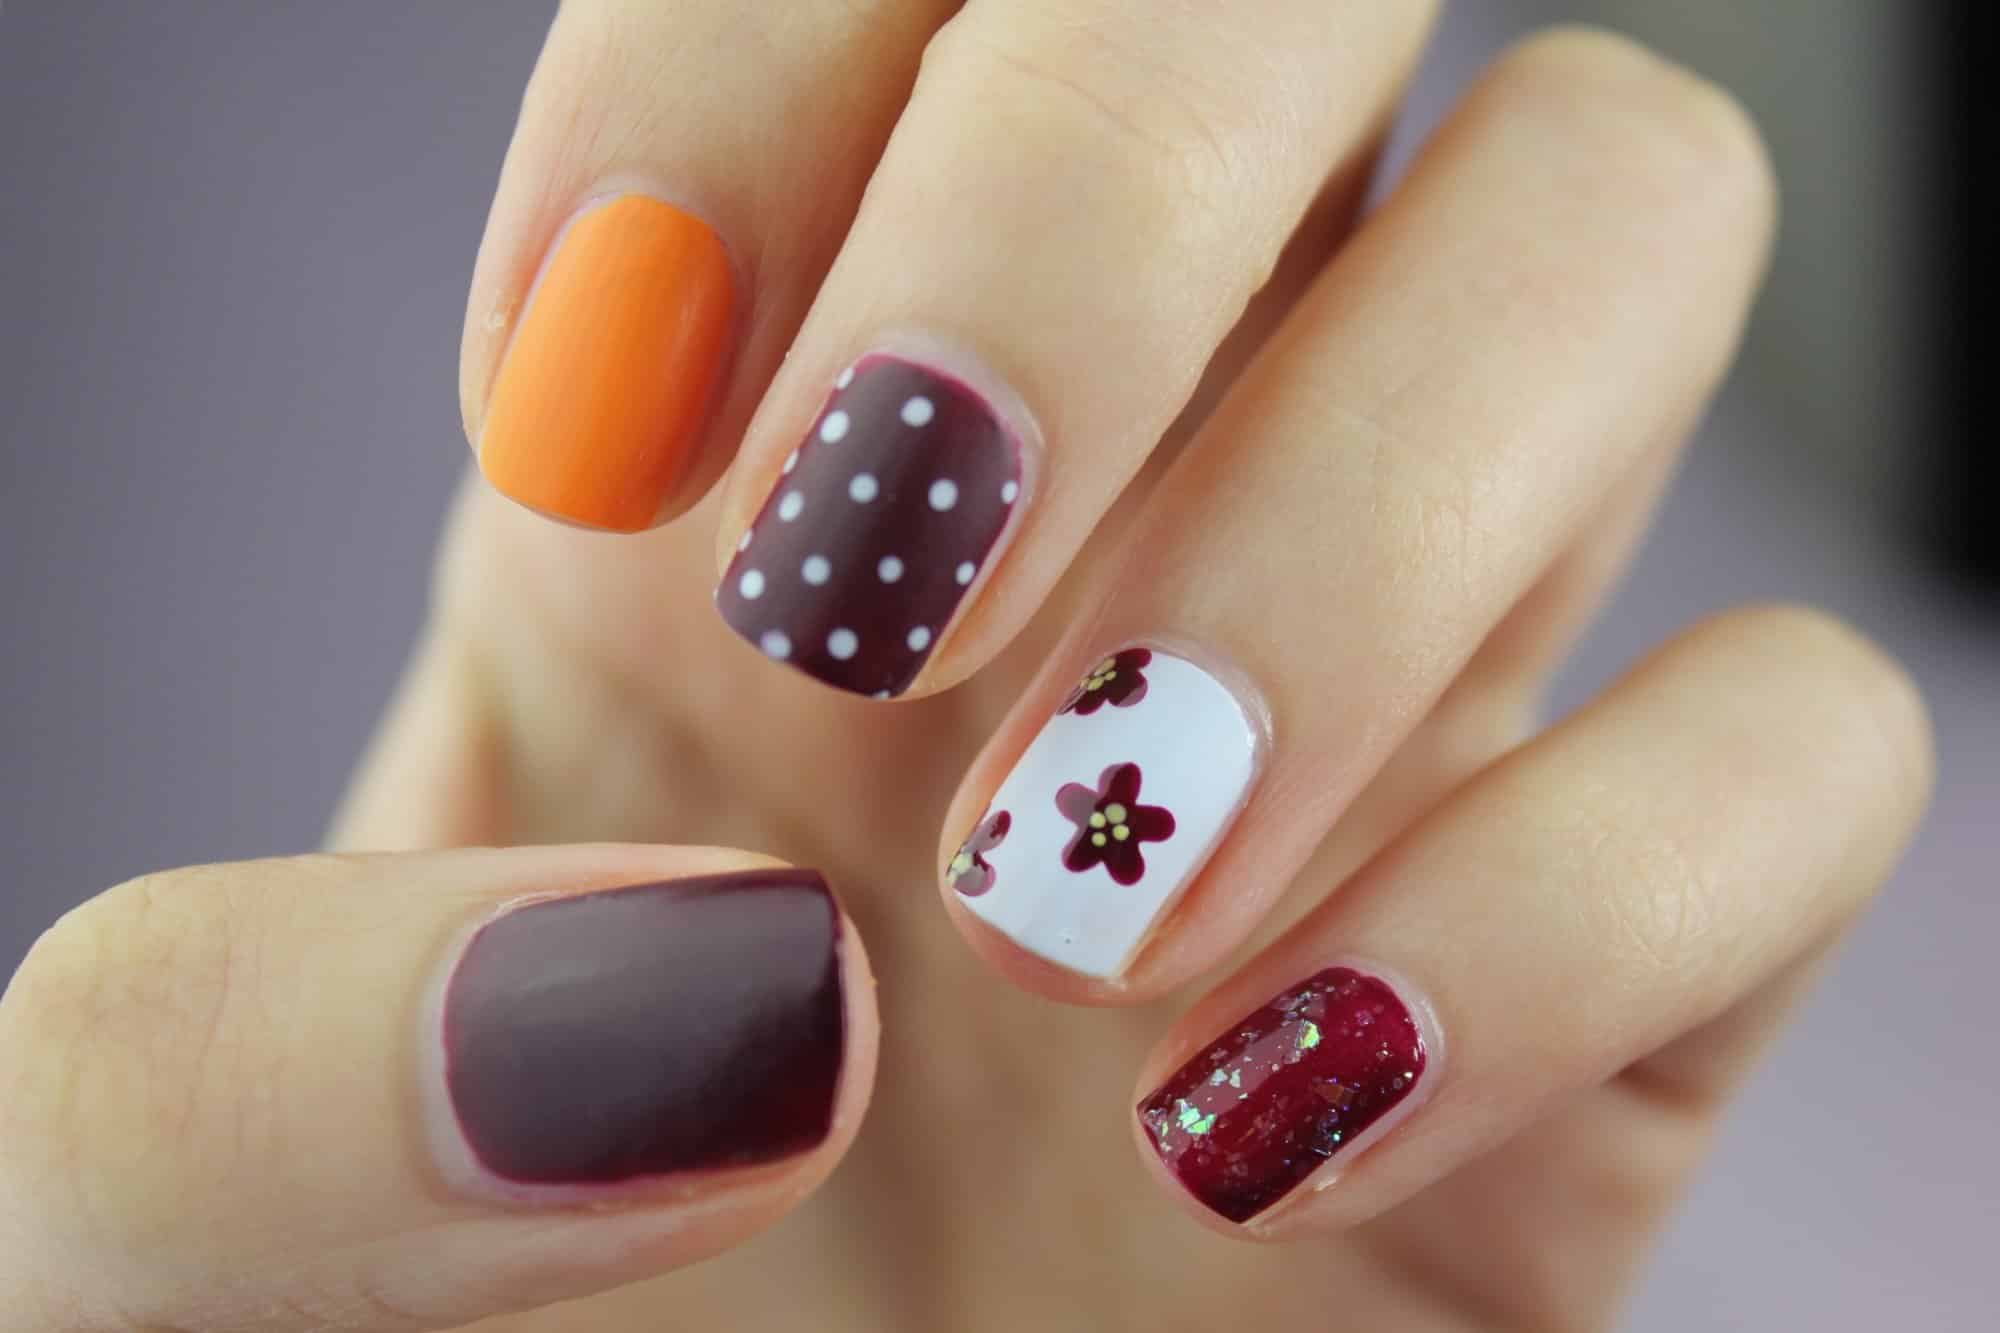 2023 Nail Trends: 25 Simple Designs for Stylish Manicures